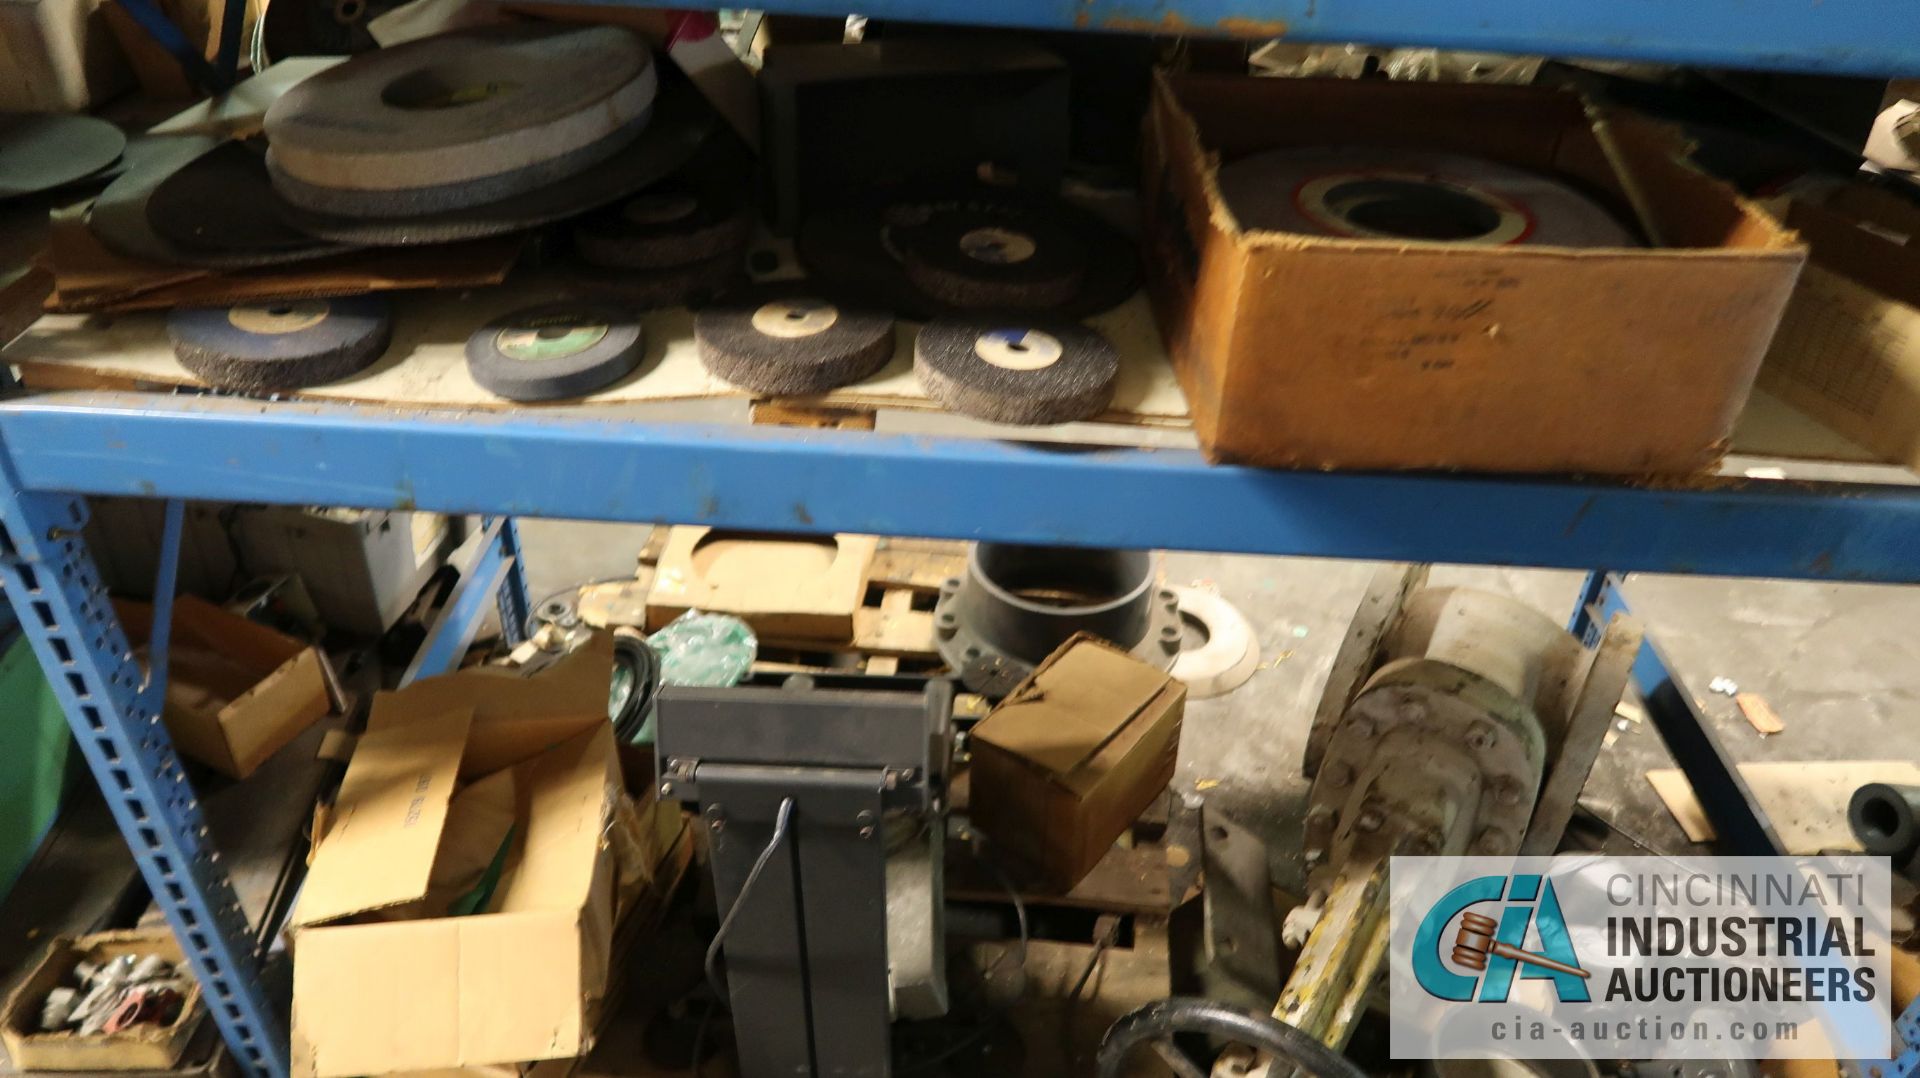 (LOT) ASSORTED ABRASIVES, GRINDING WHEELS AND HARDWARE ON (5) SECTIONS BLUE RACK AND IN WIRE BASKET - Image 11 of 24